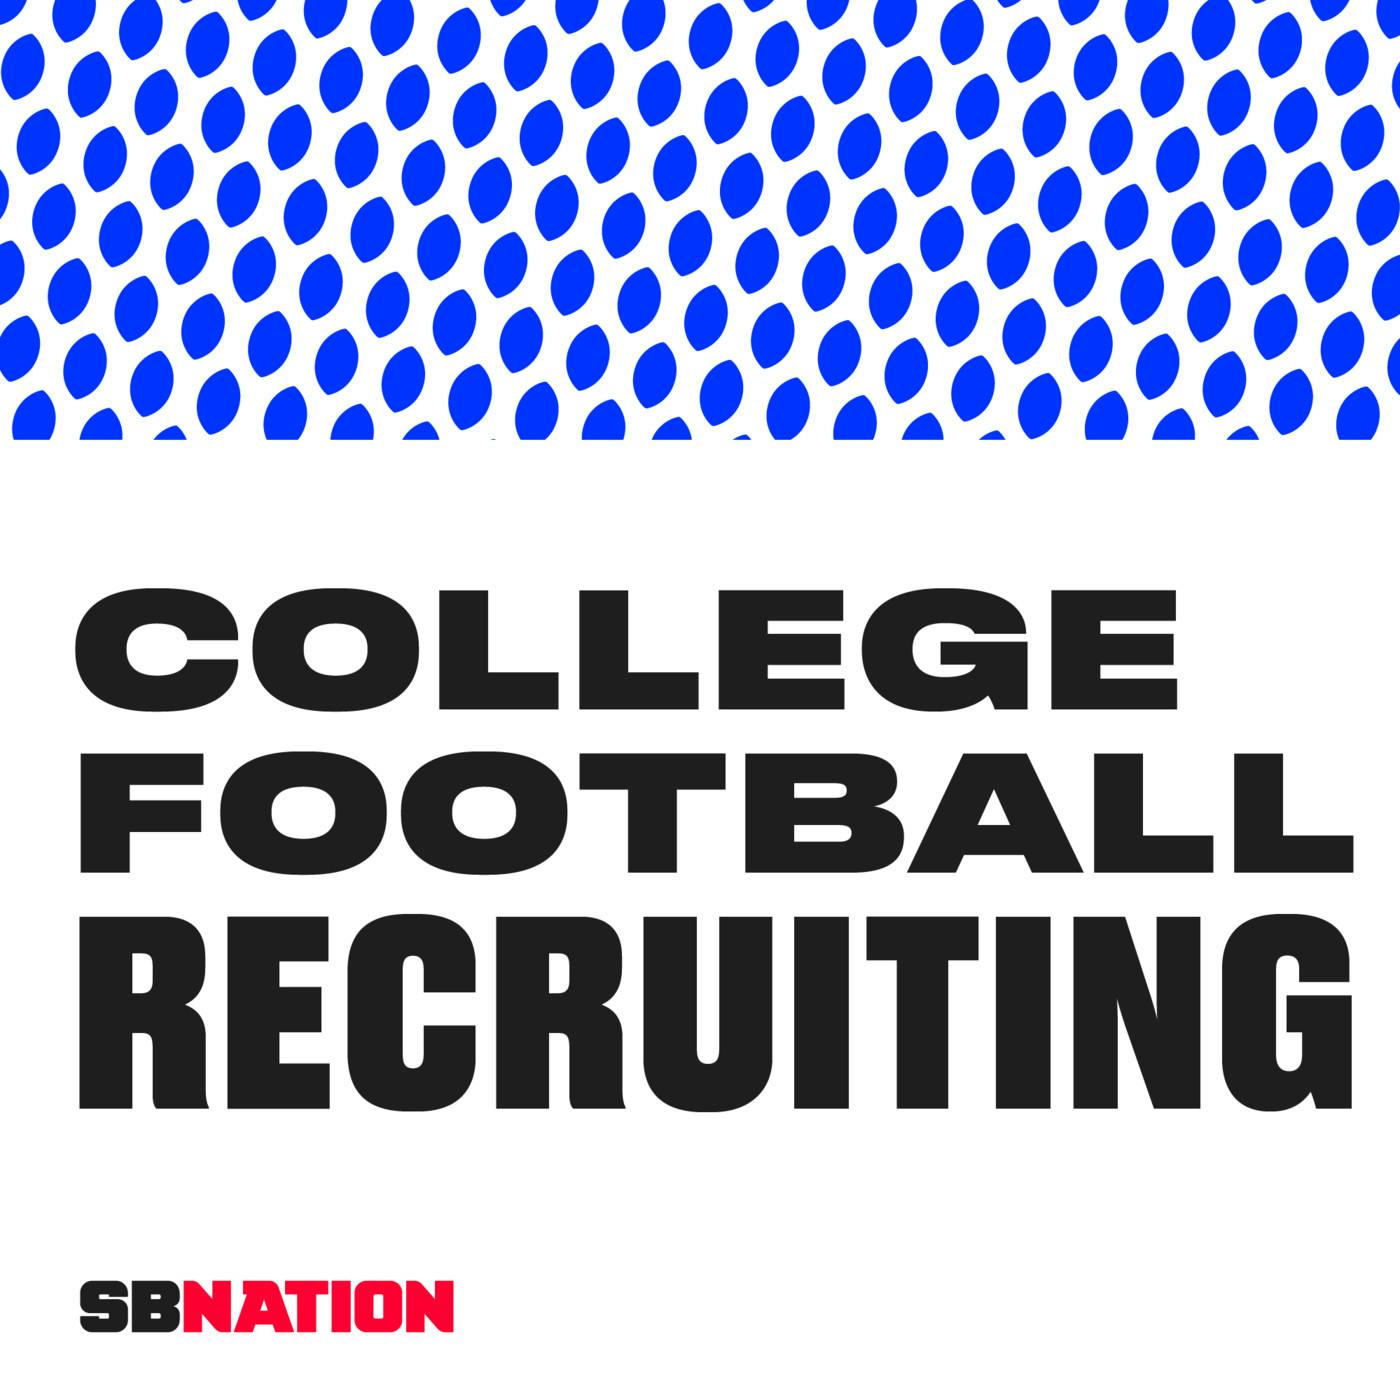 Hot, cold starts in college football recruiting